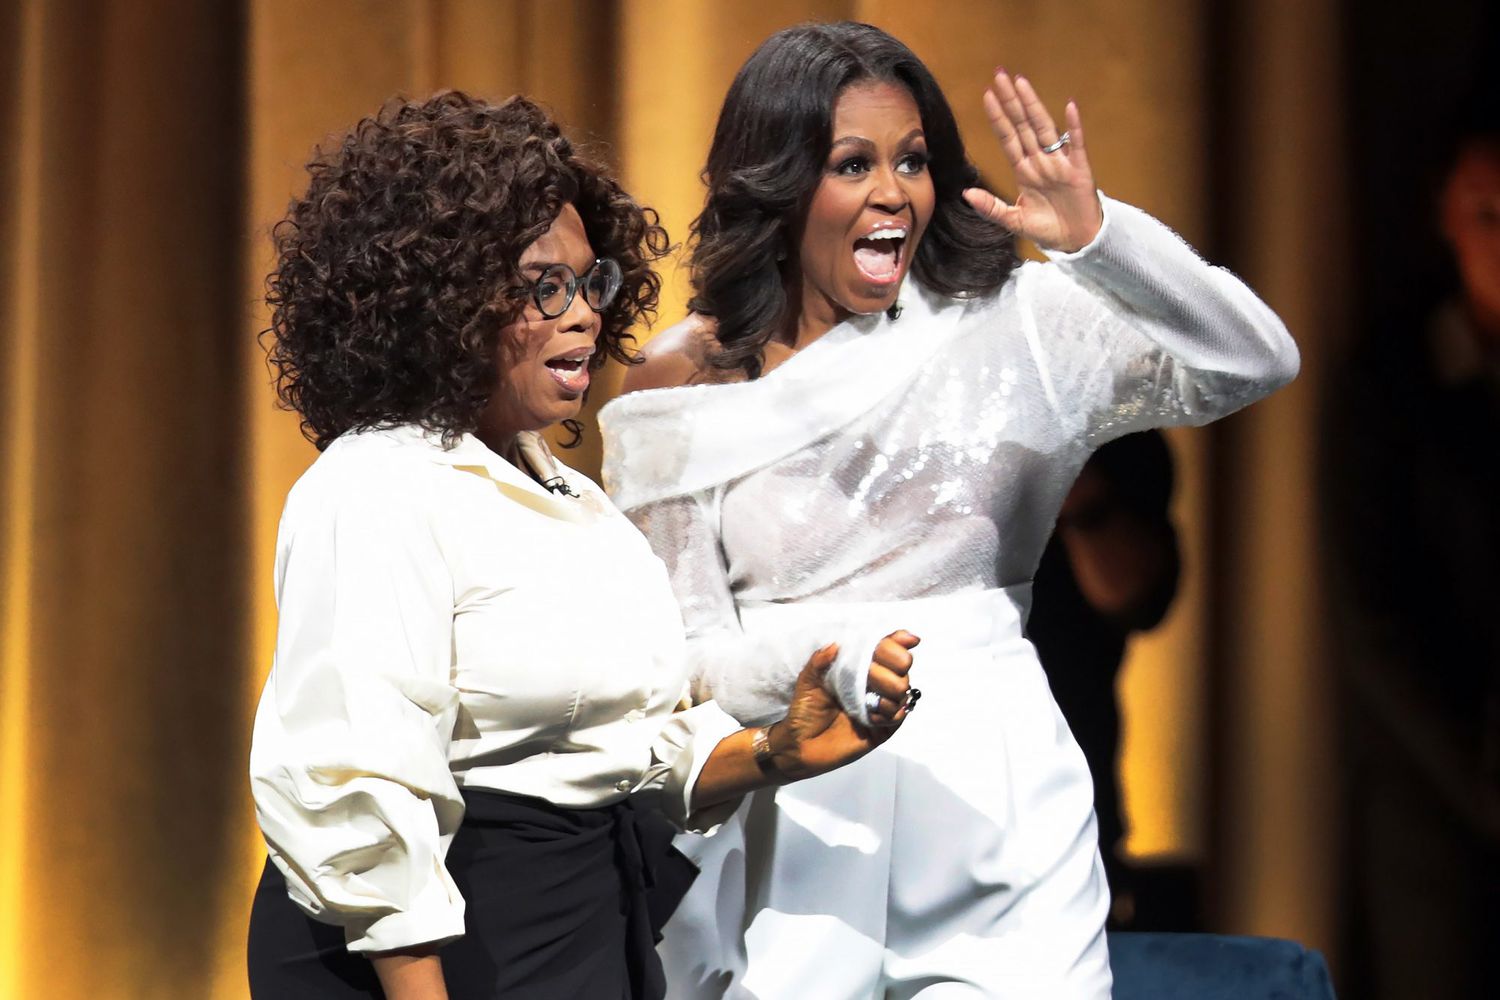 Former First Lady Michelle Obama Launches Arena Book Tour In Chicago At The United Center